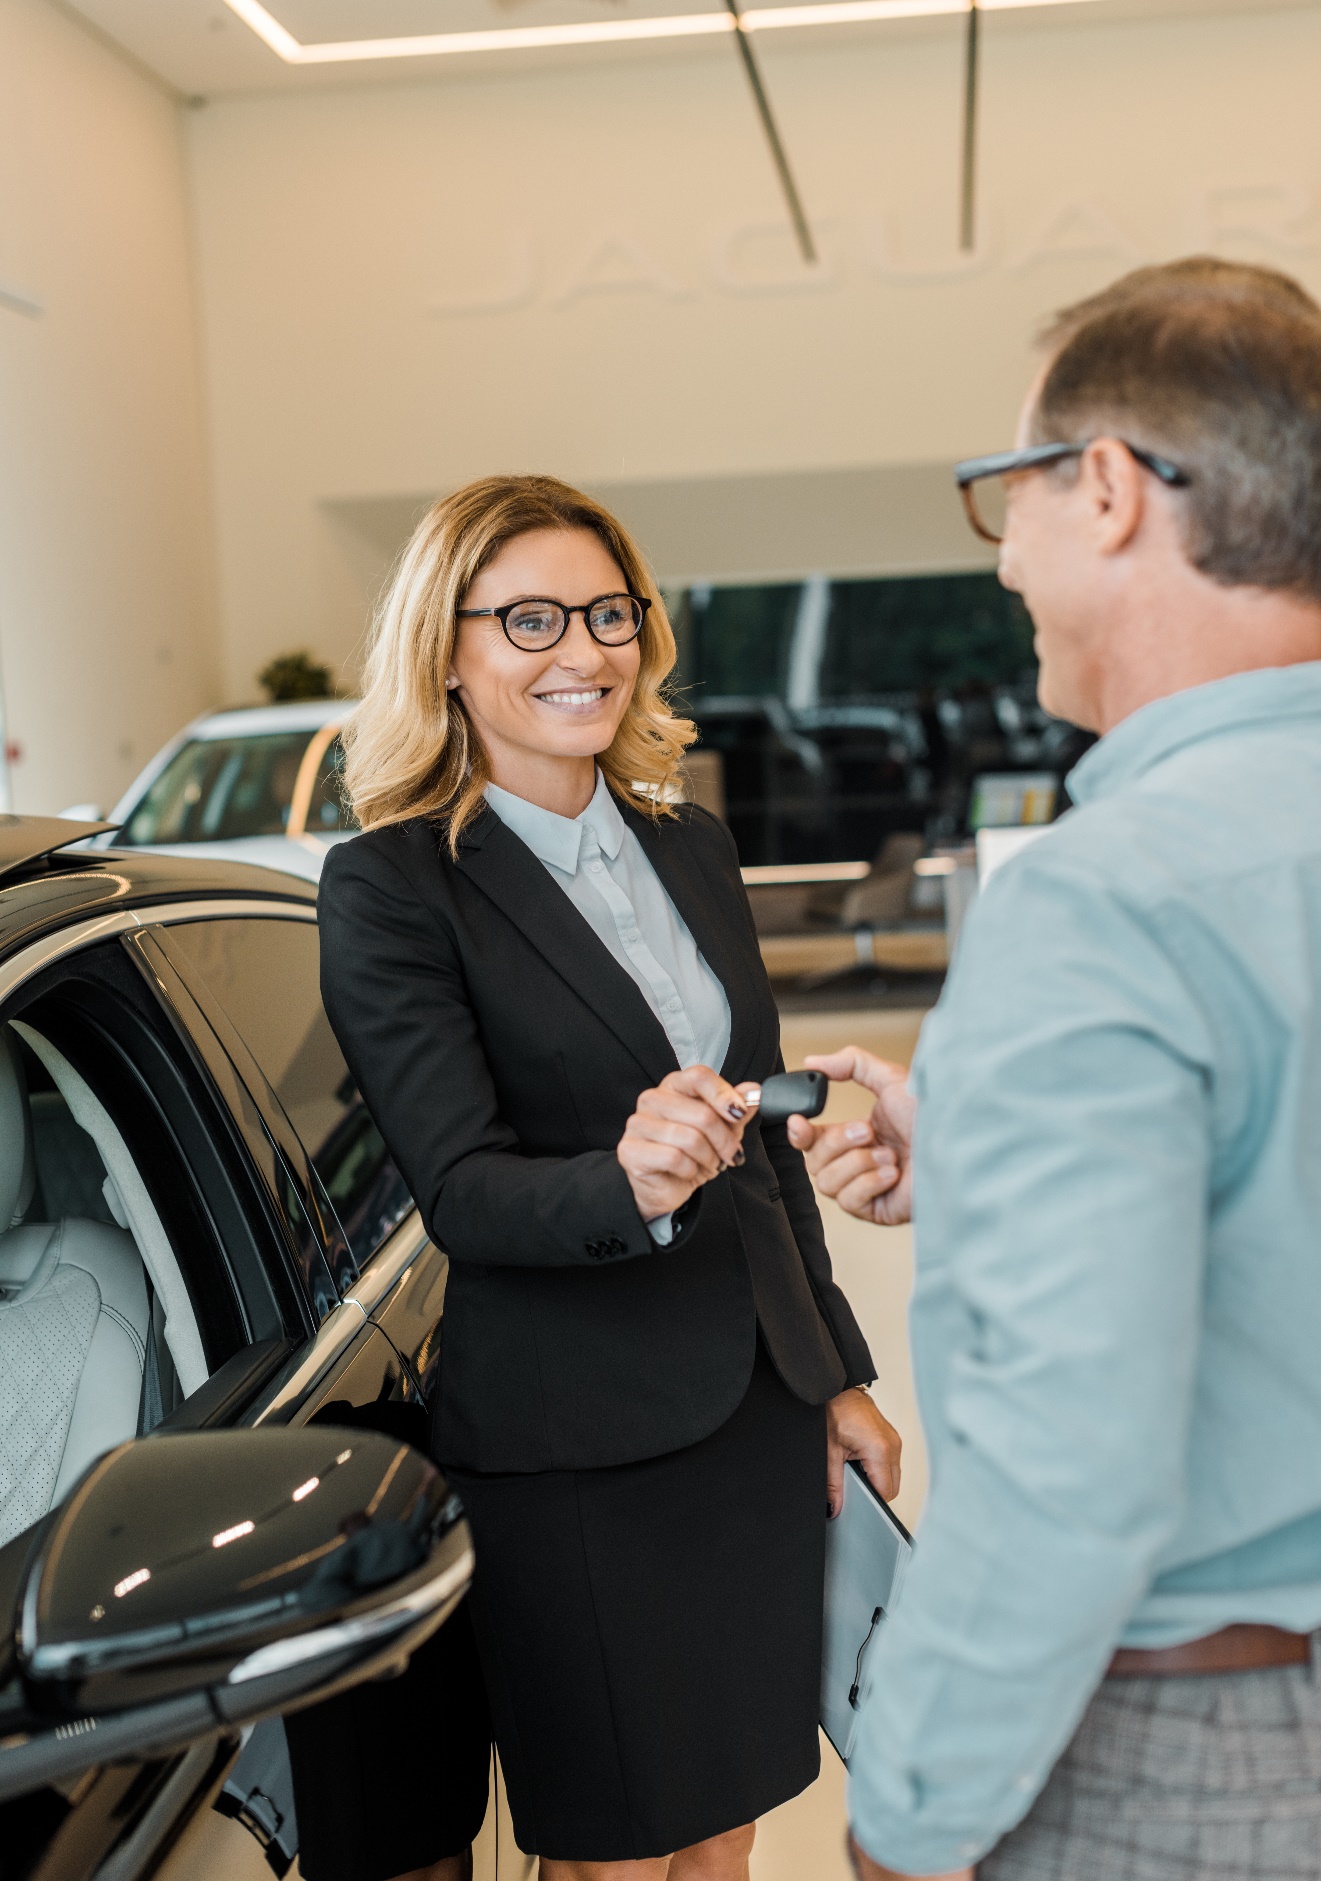 Know more about selling cars in UAE